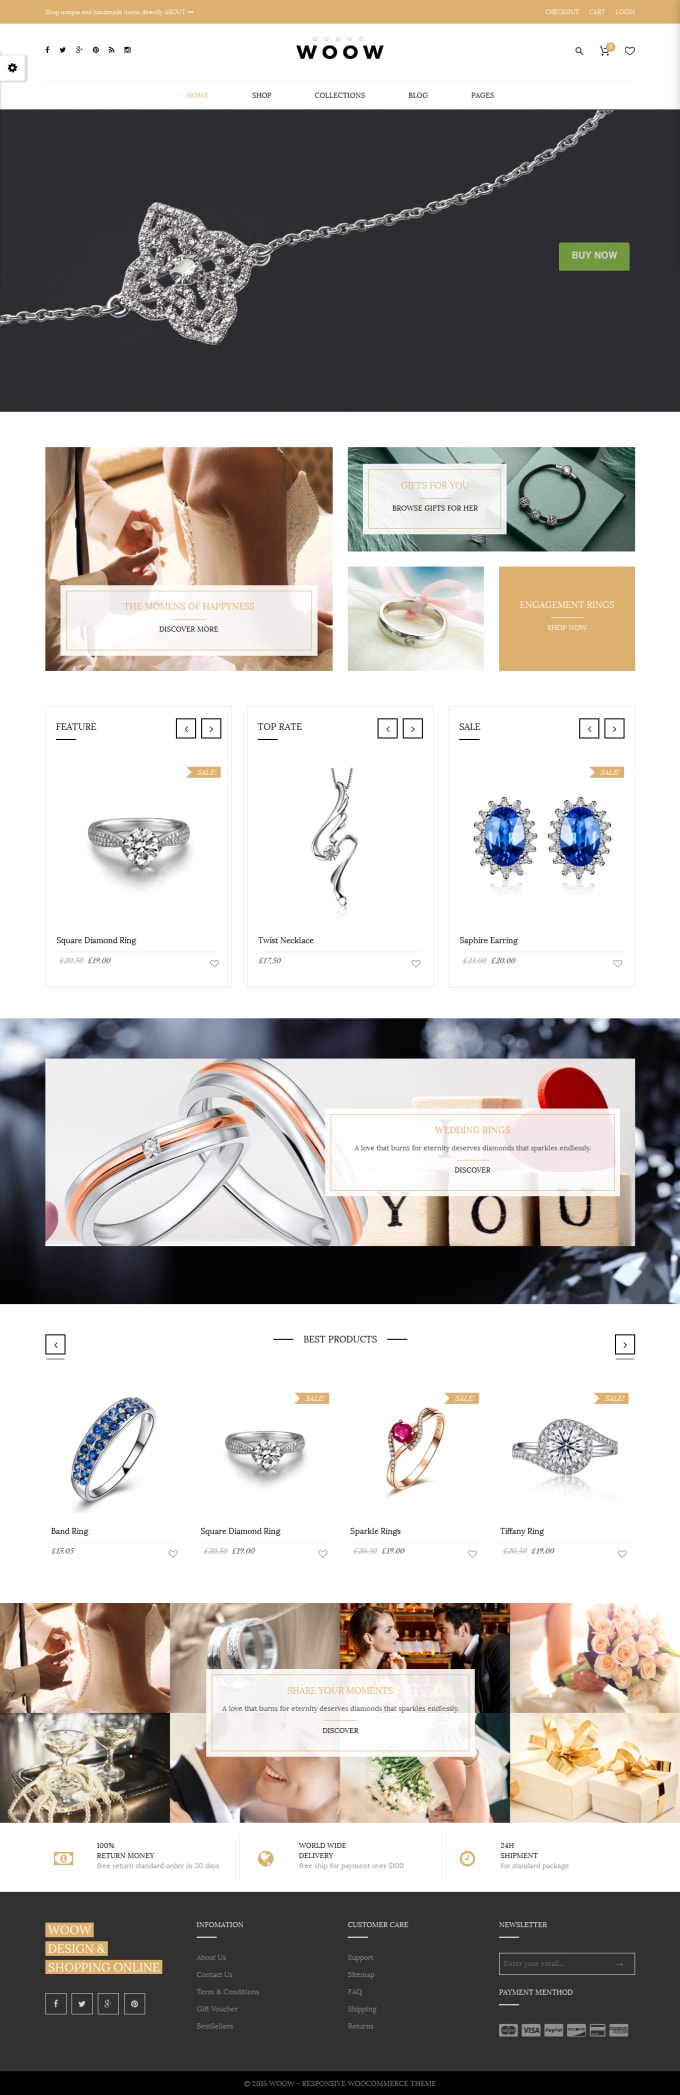 I will create good looking ecommerce site using woow theme